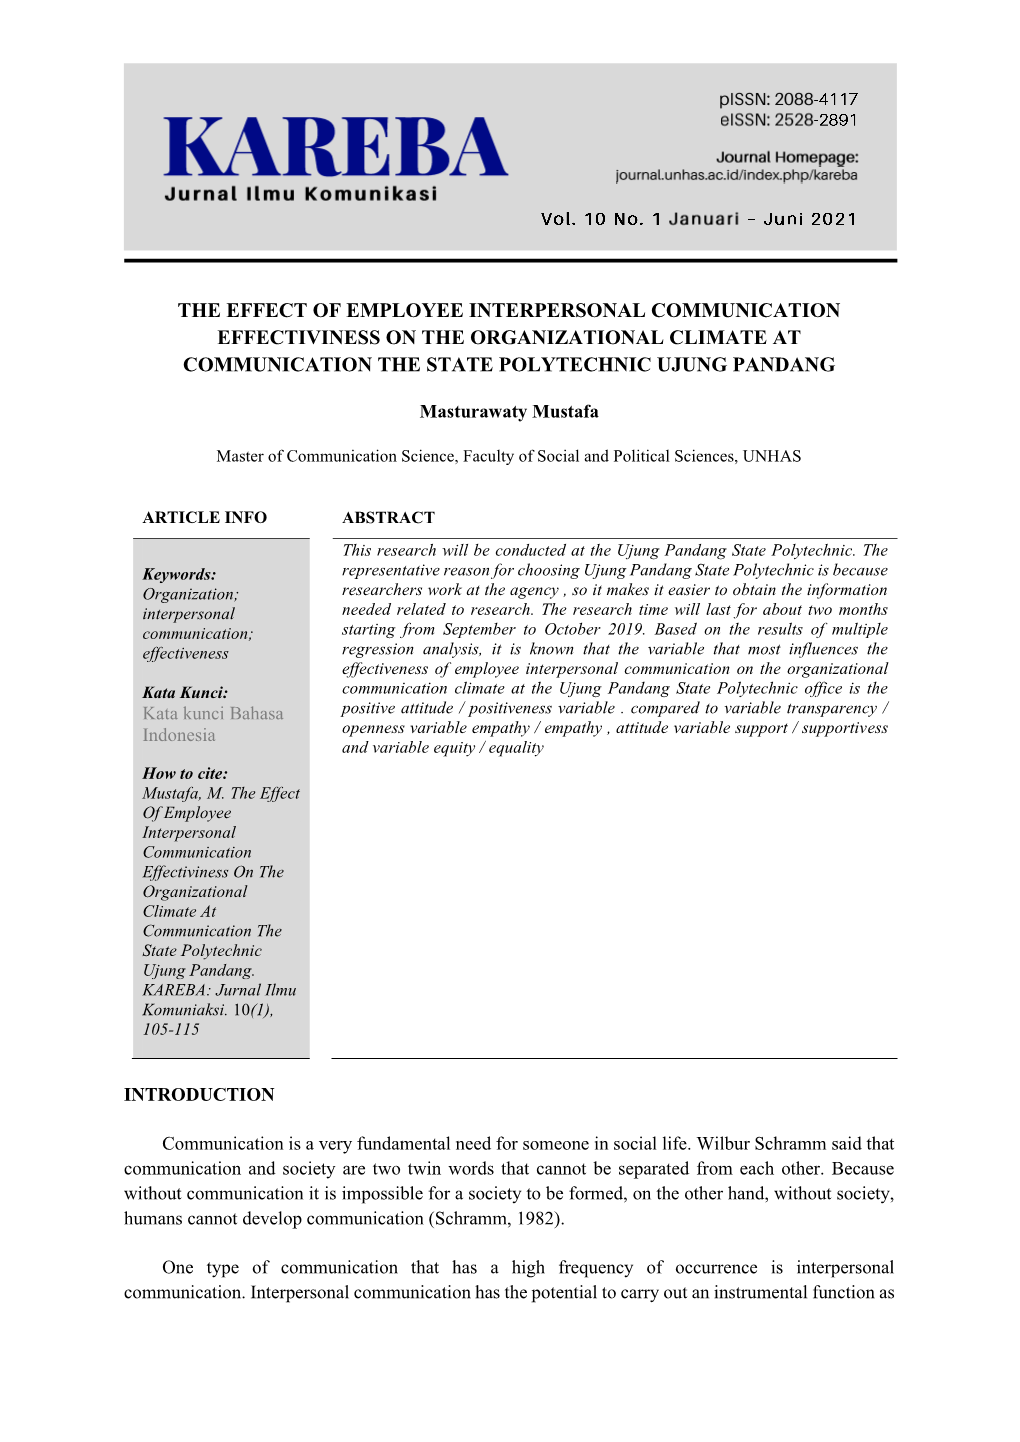 The Effect of Employee Interpersonal Communication Effectiviness on the Organizational Climate at Communication the State Polytechnic Ujung Pandang